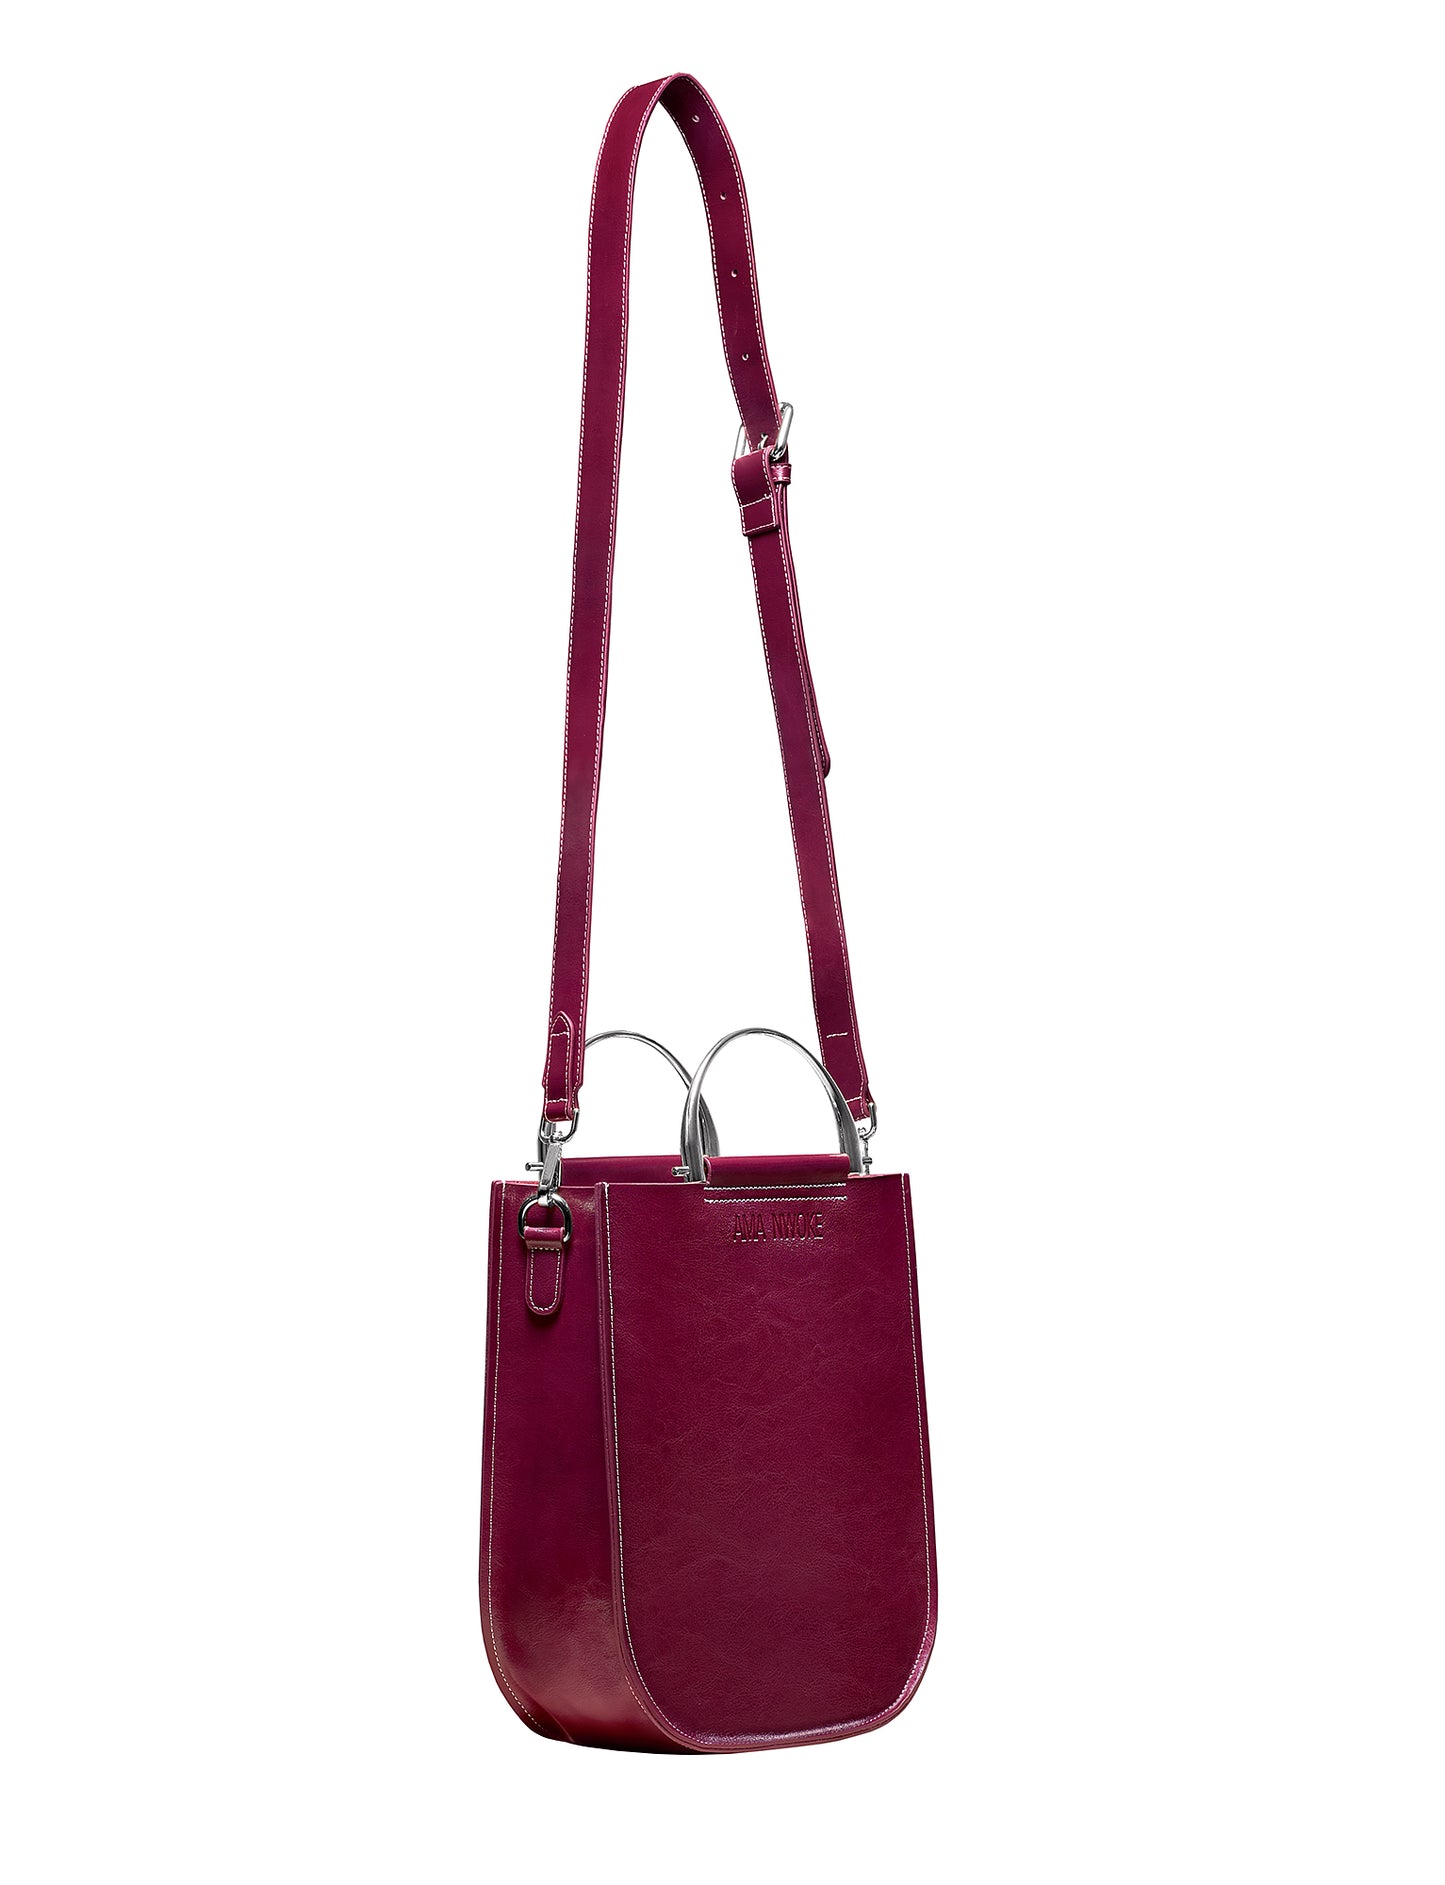 Soft Leather Tote in Plum-Silver Handle